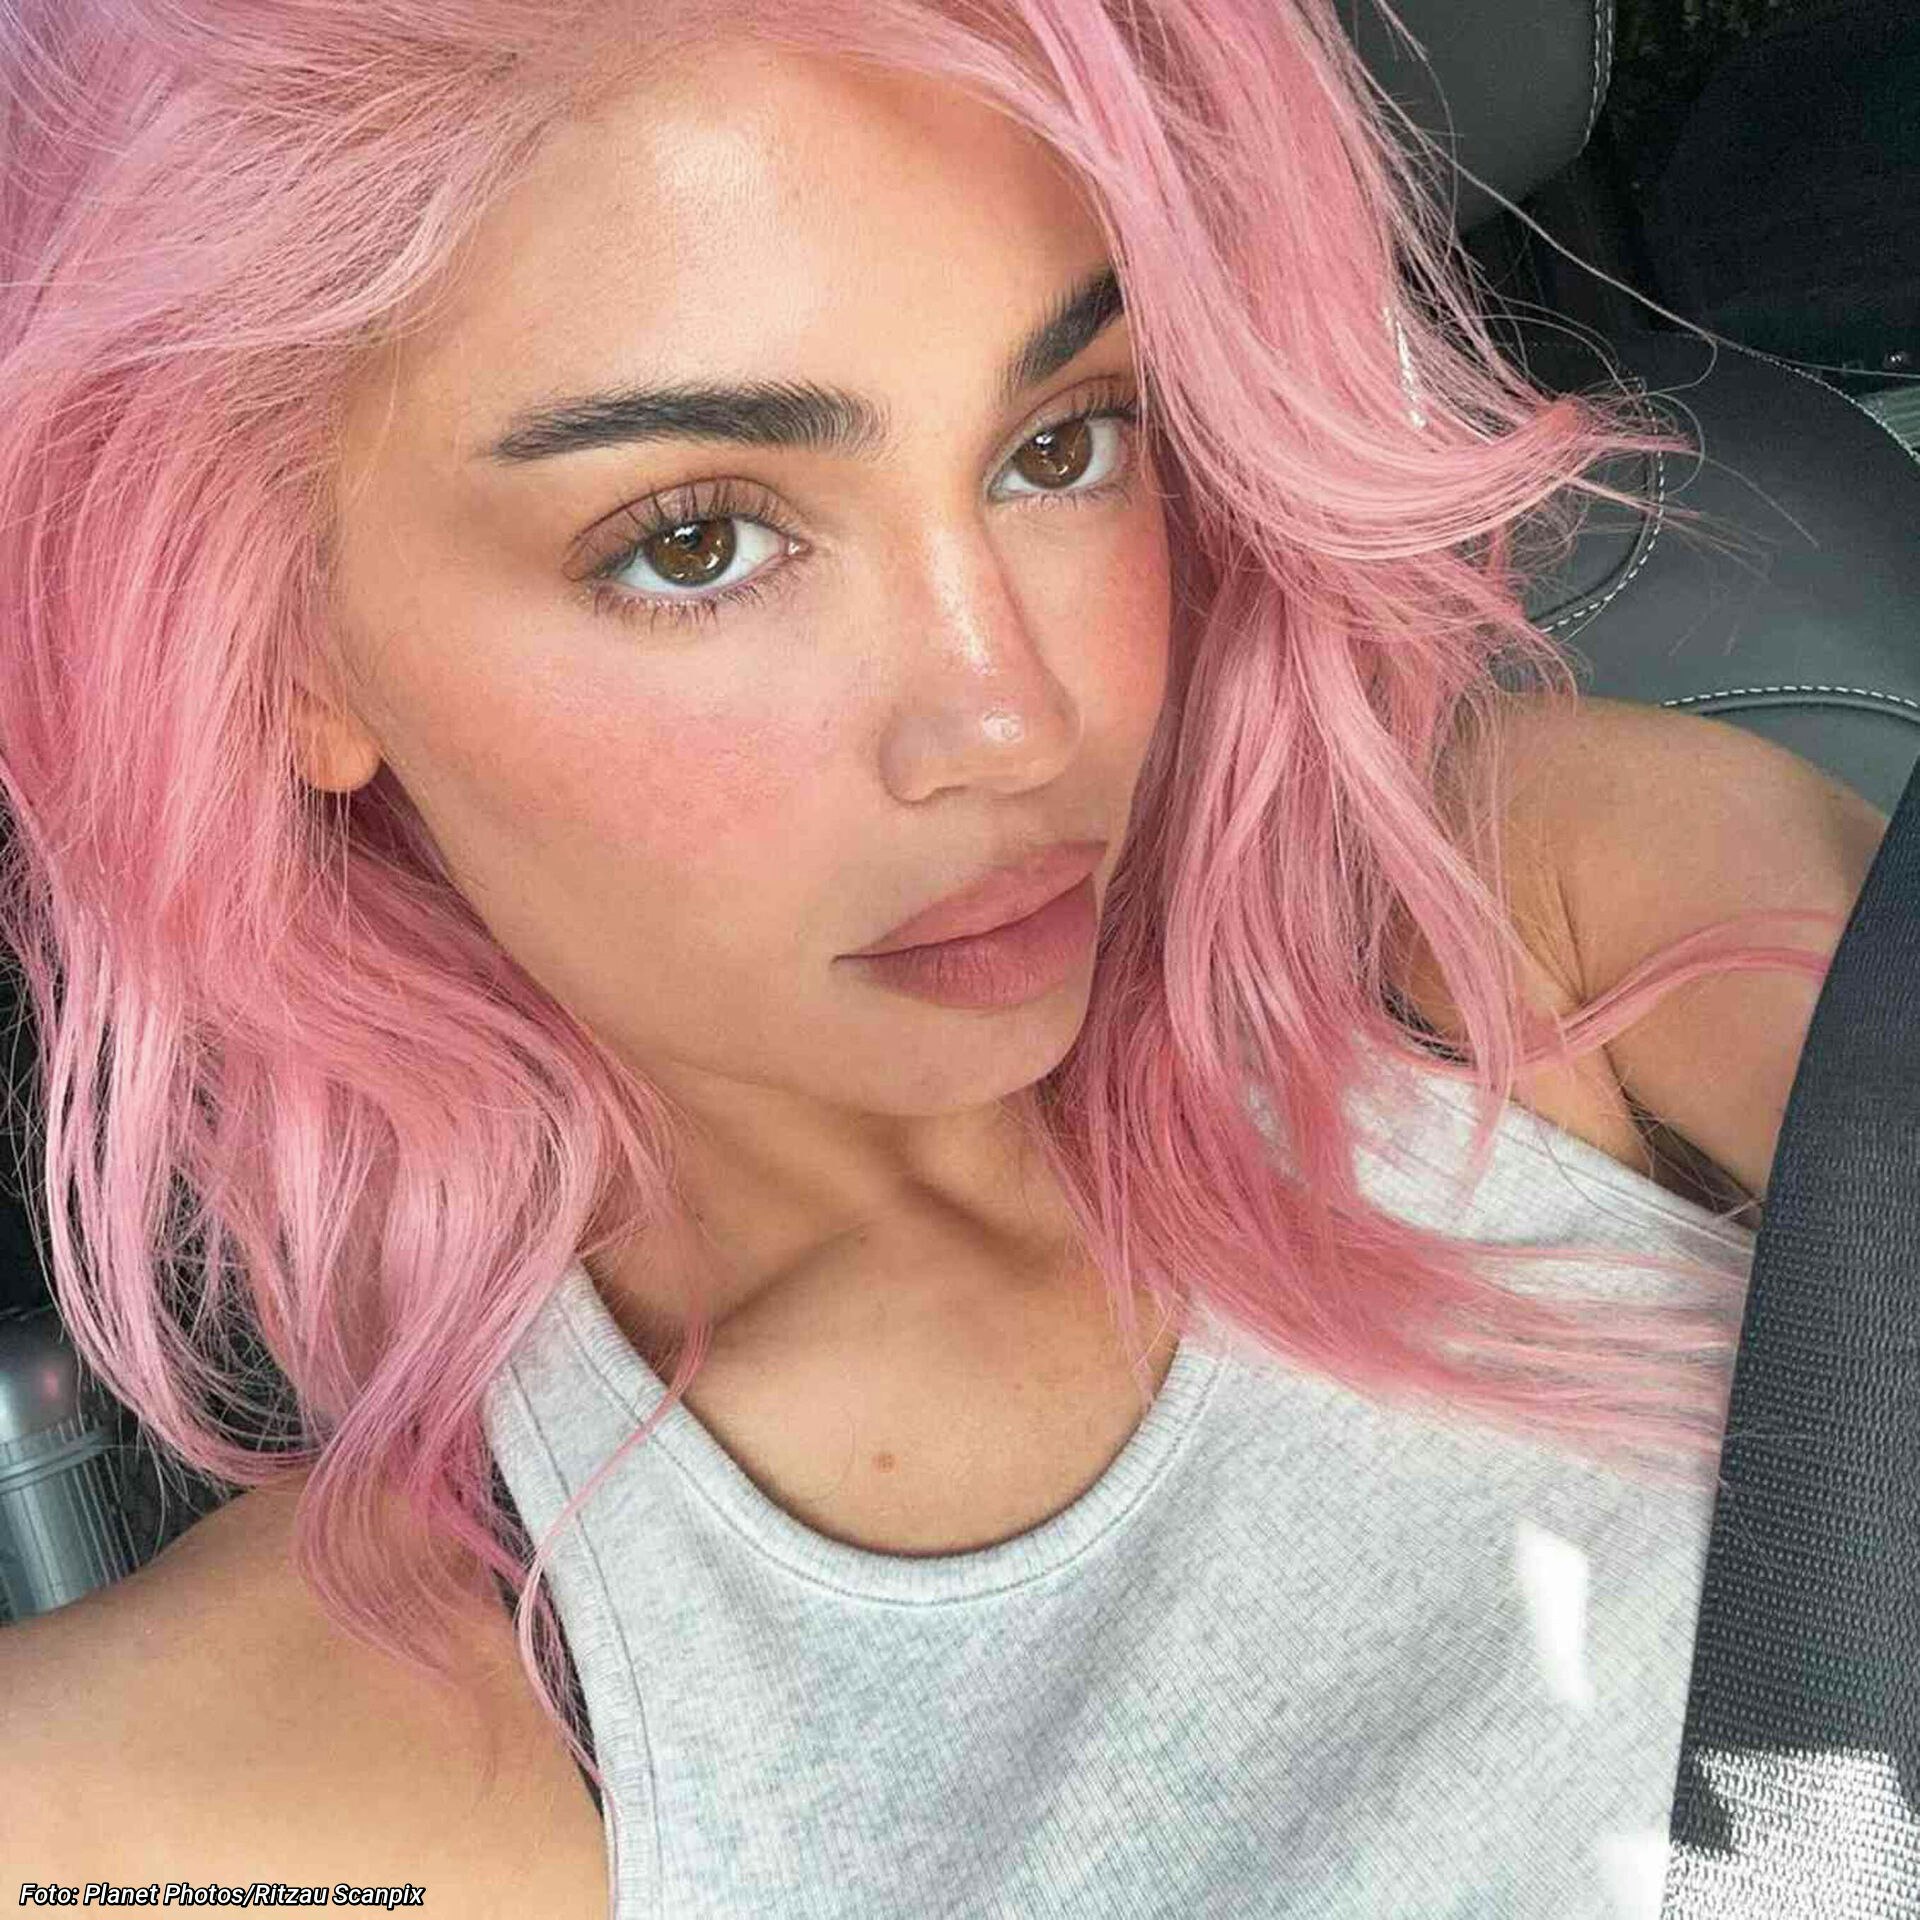 18-1-2024 Kylie Jenner's Pink Hair Makes a Comeback in New Barbiecore Selfies: 'Remember Me' PLANET PHOTOS www.planetphotos.co.uk info@planetphotos.co.uk +44 (0)1959 532 227